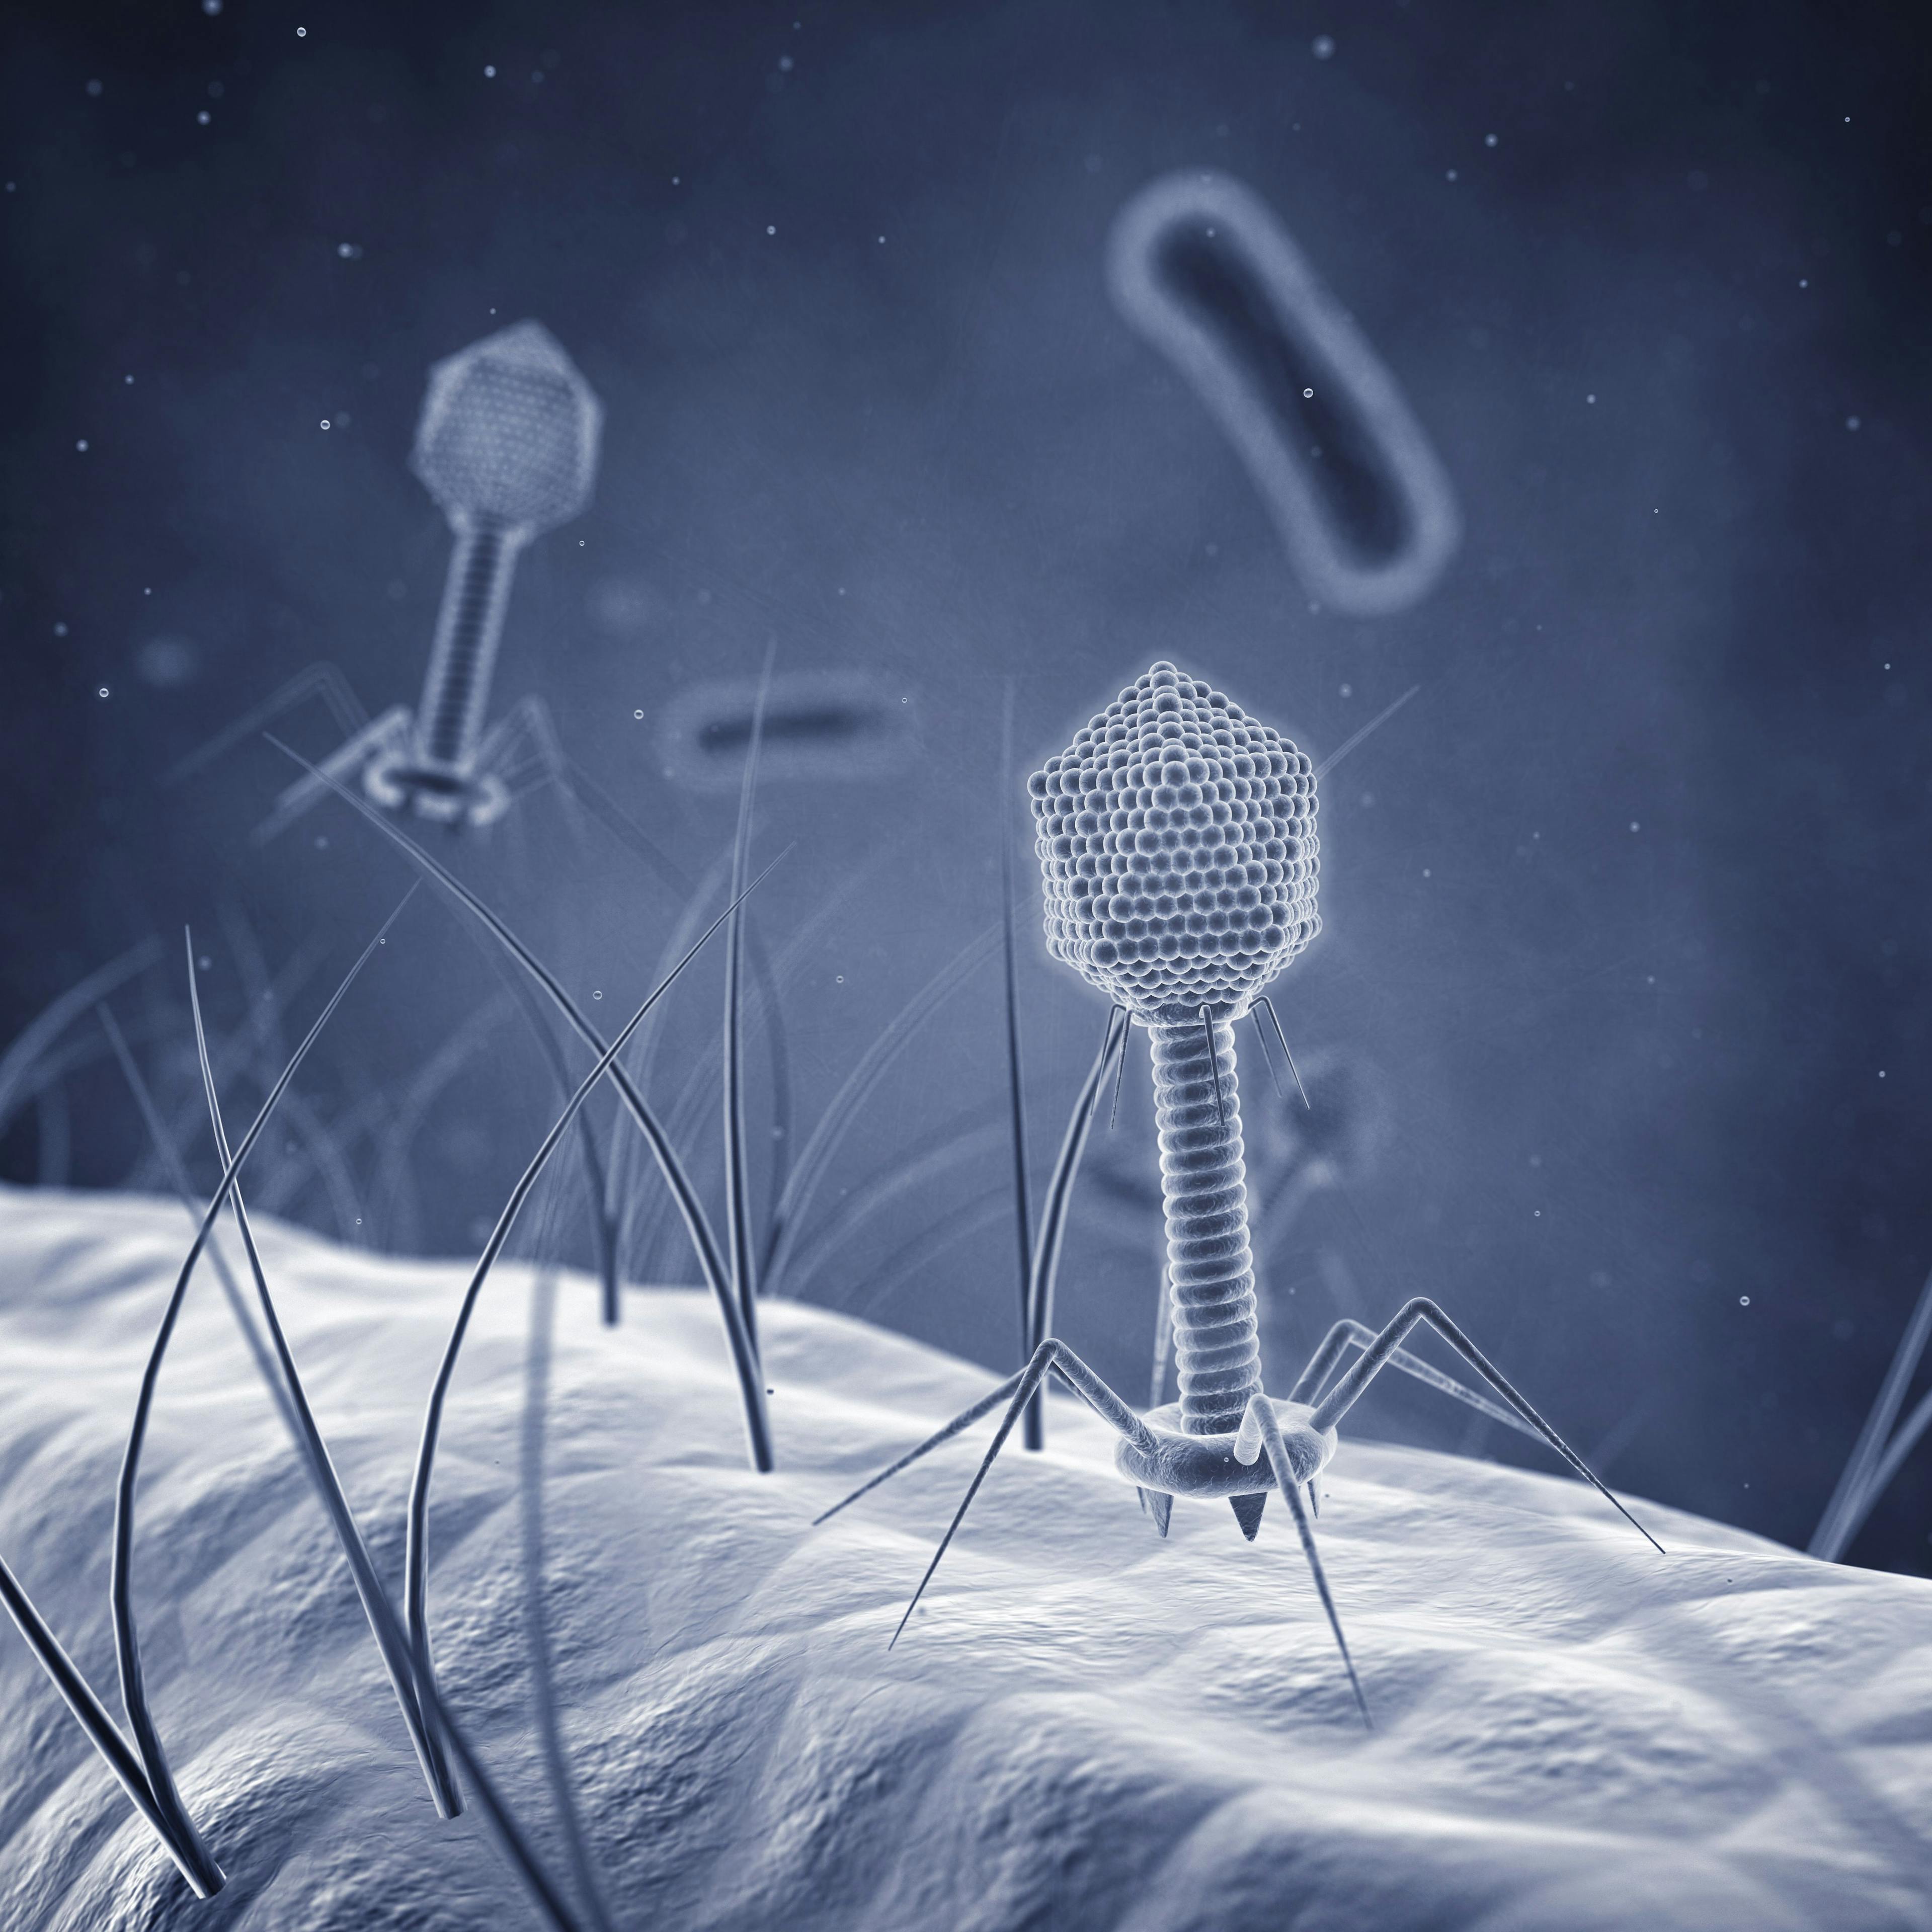 Study Recreates Biological Microenvironments, Demonstrates Effectiveness of Phage Therapy as Antibiotic Alternative